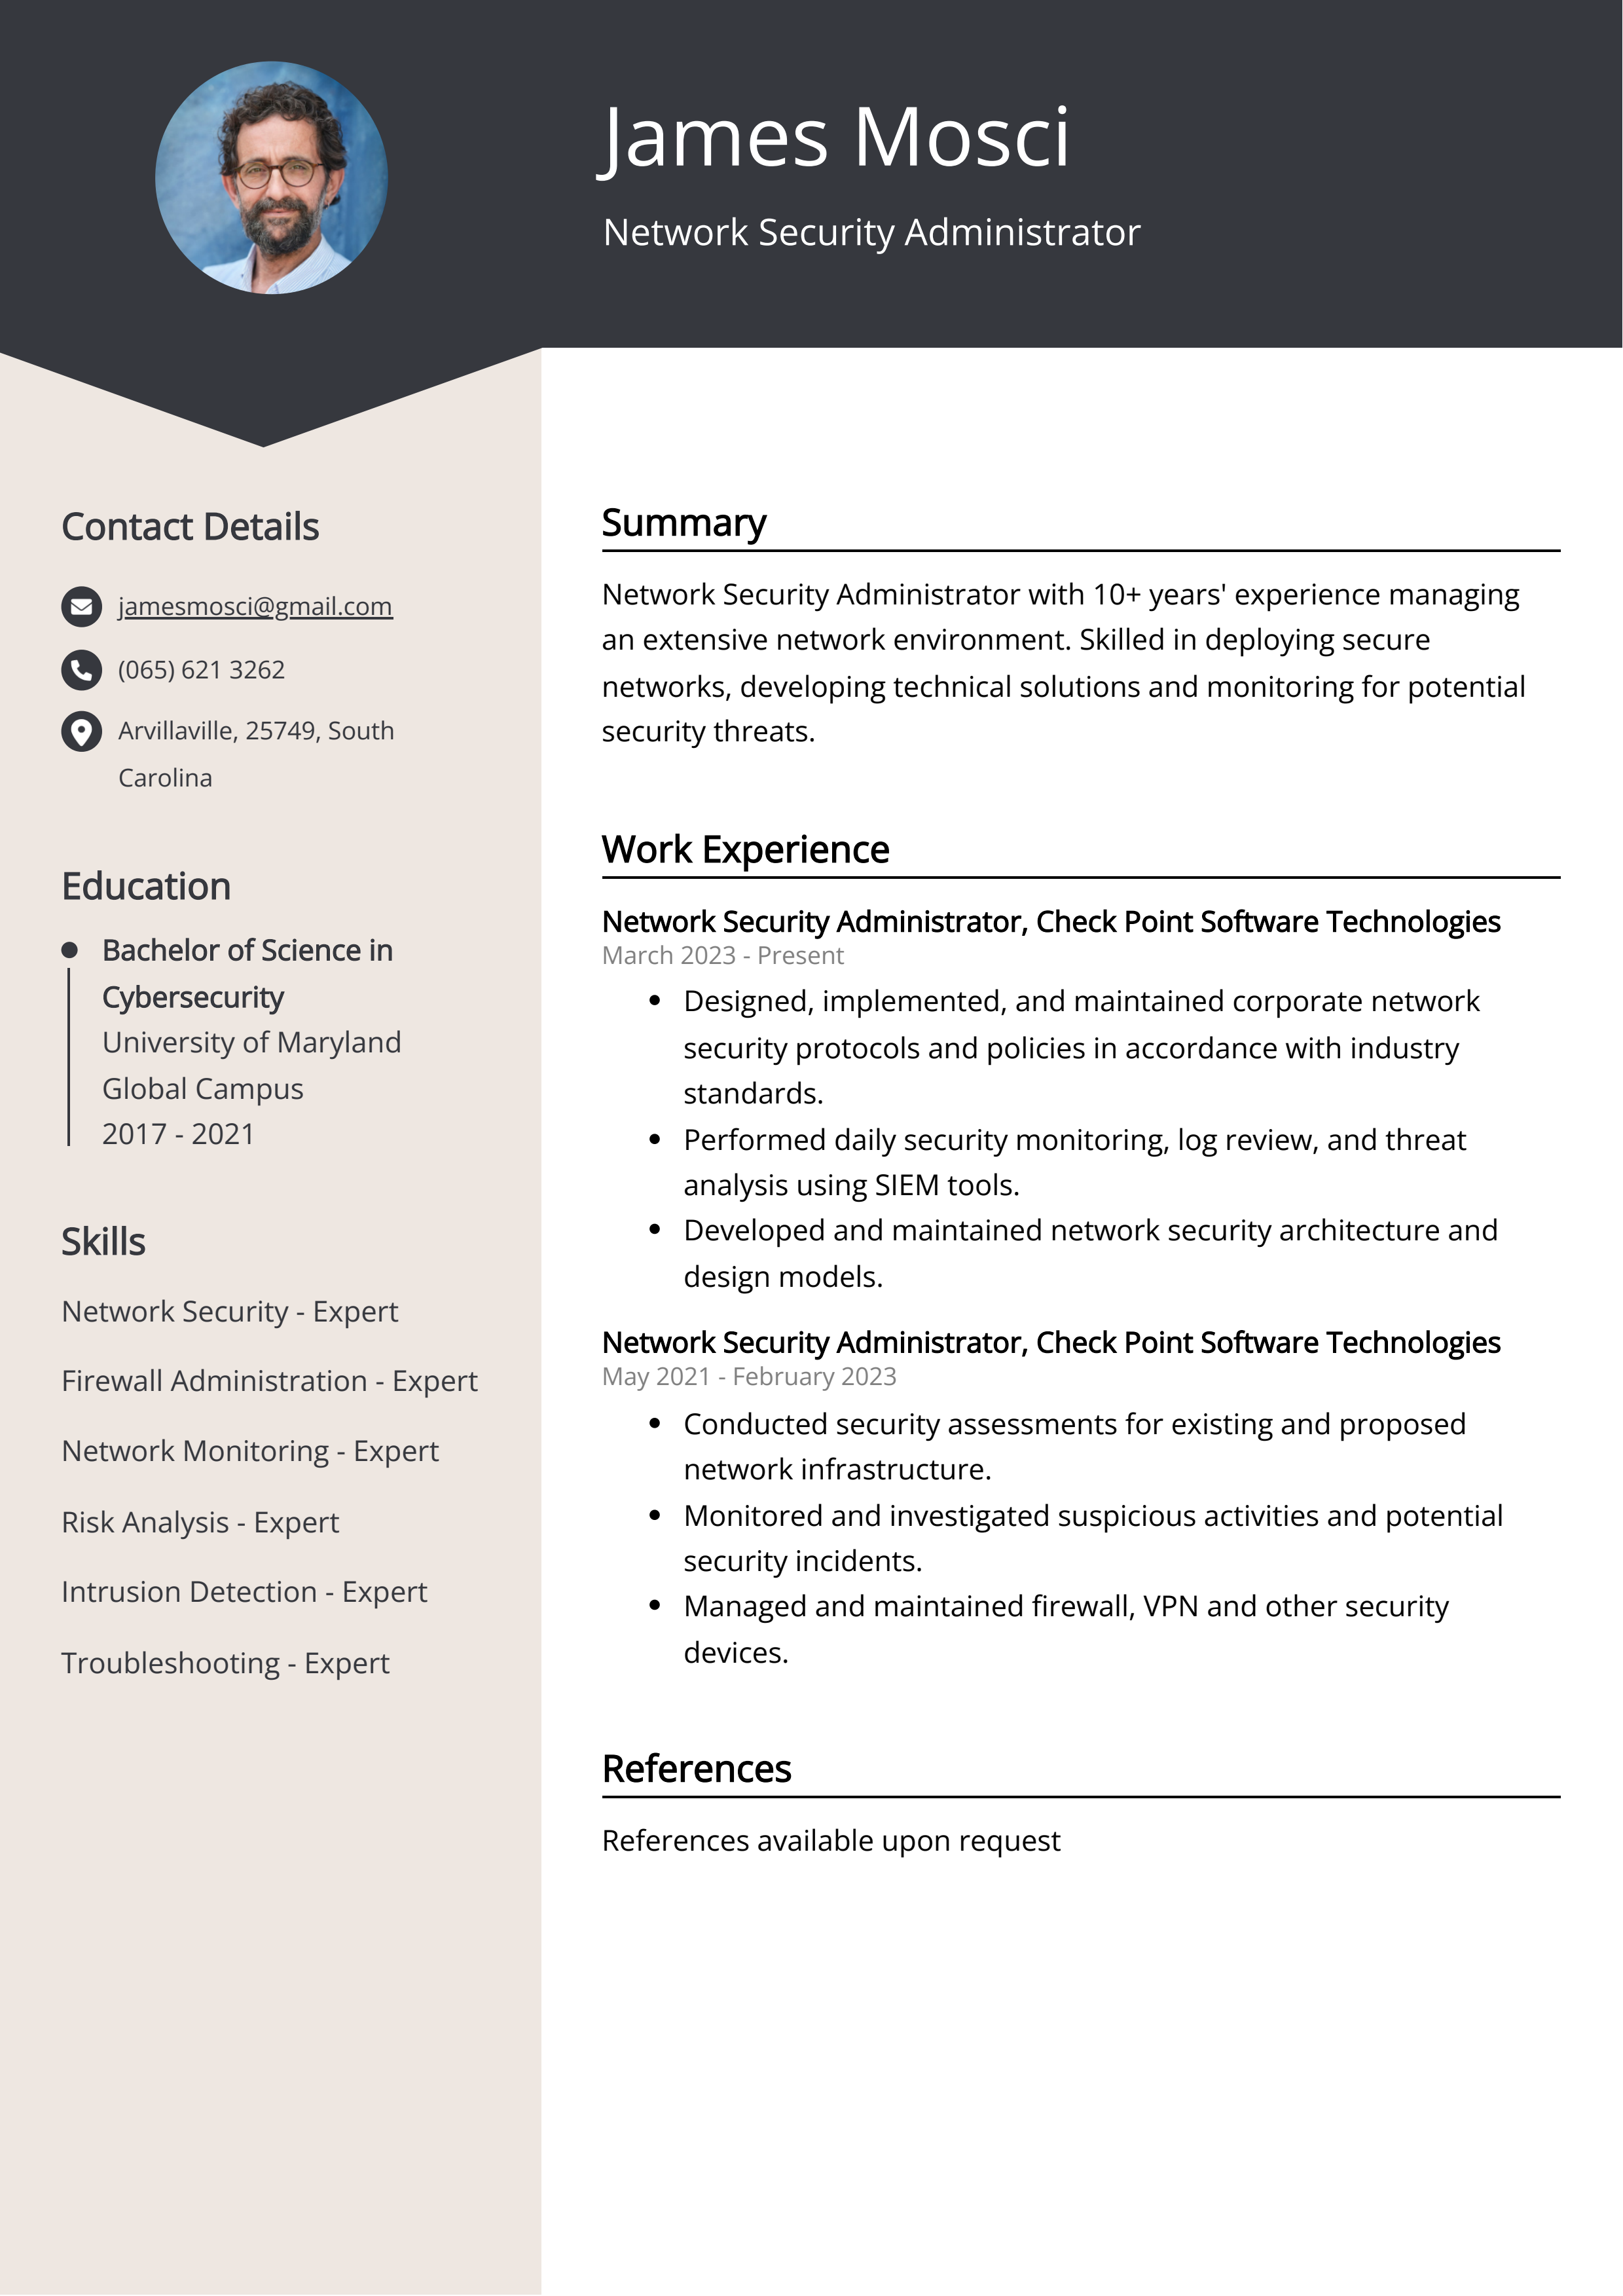 Network Security Administrator CV Example